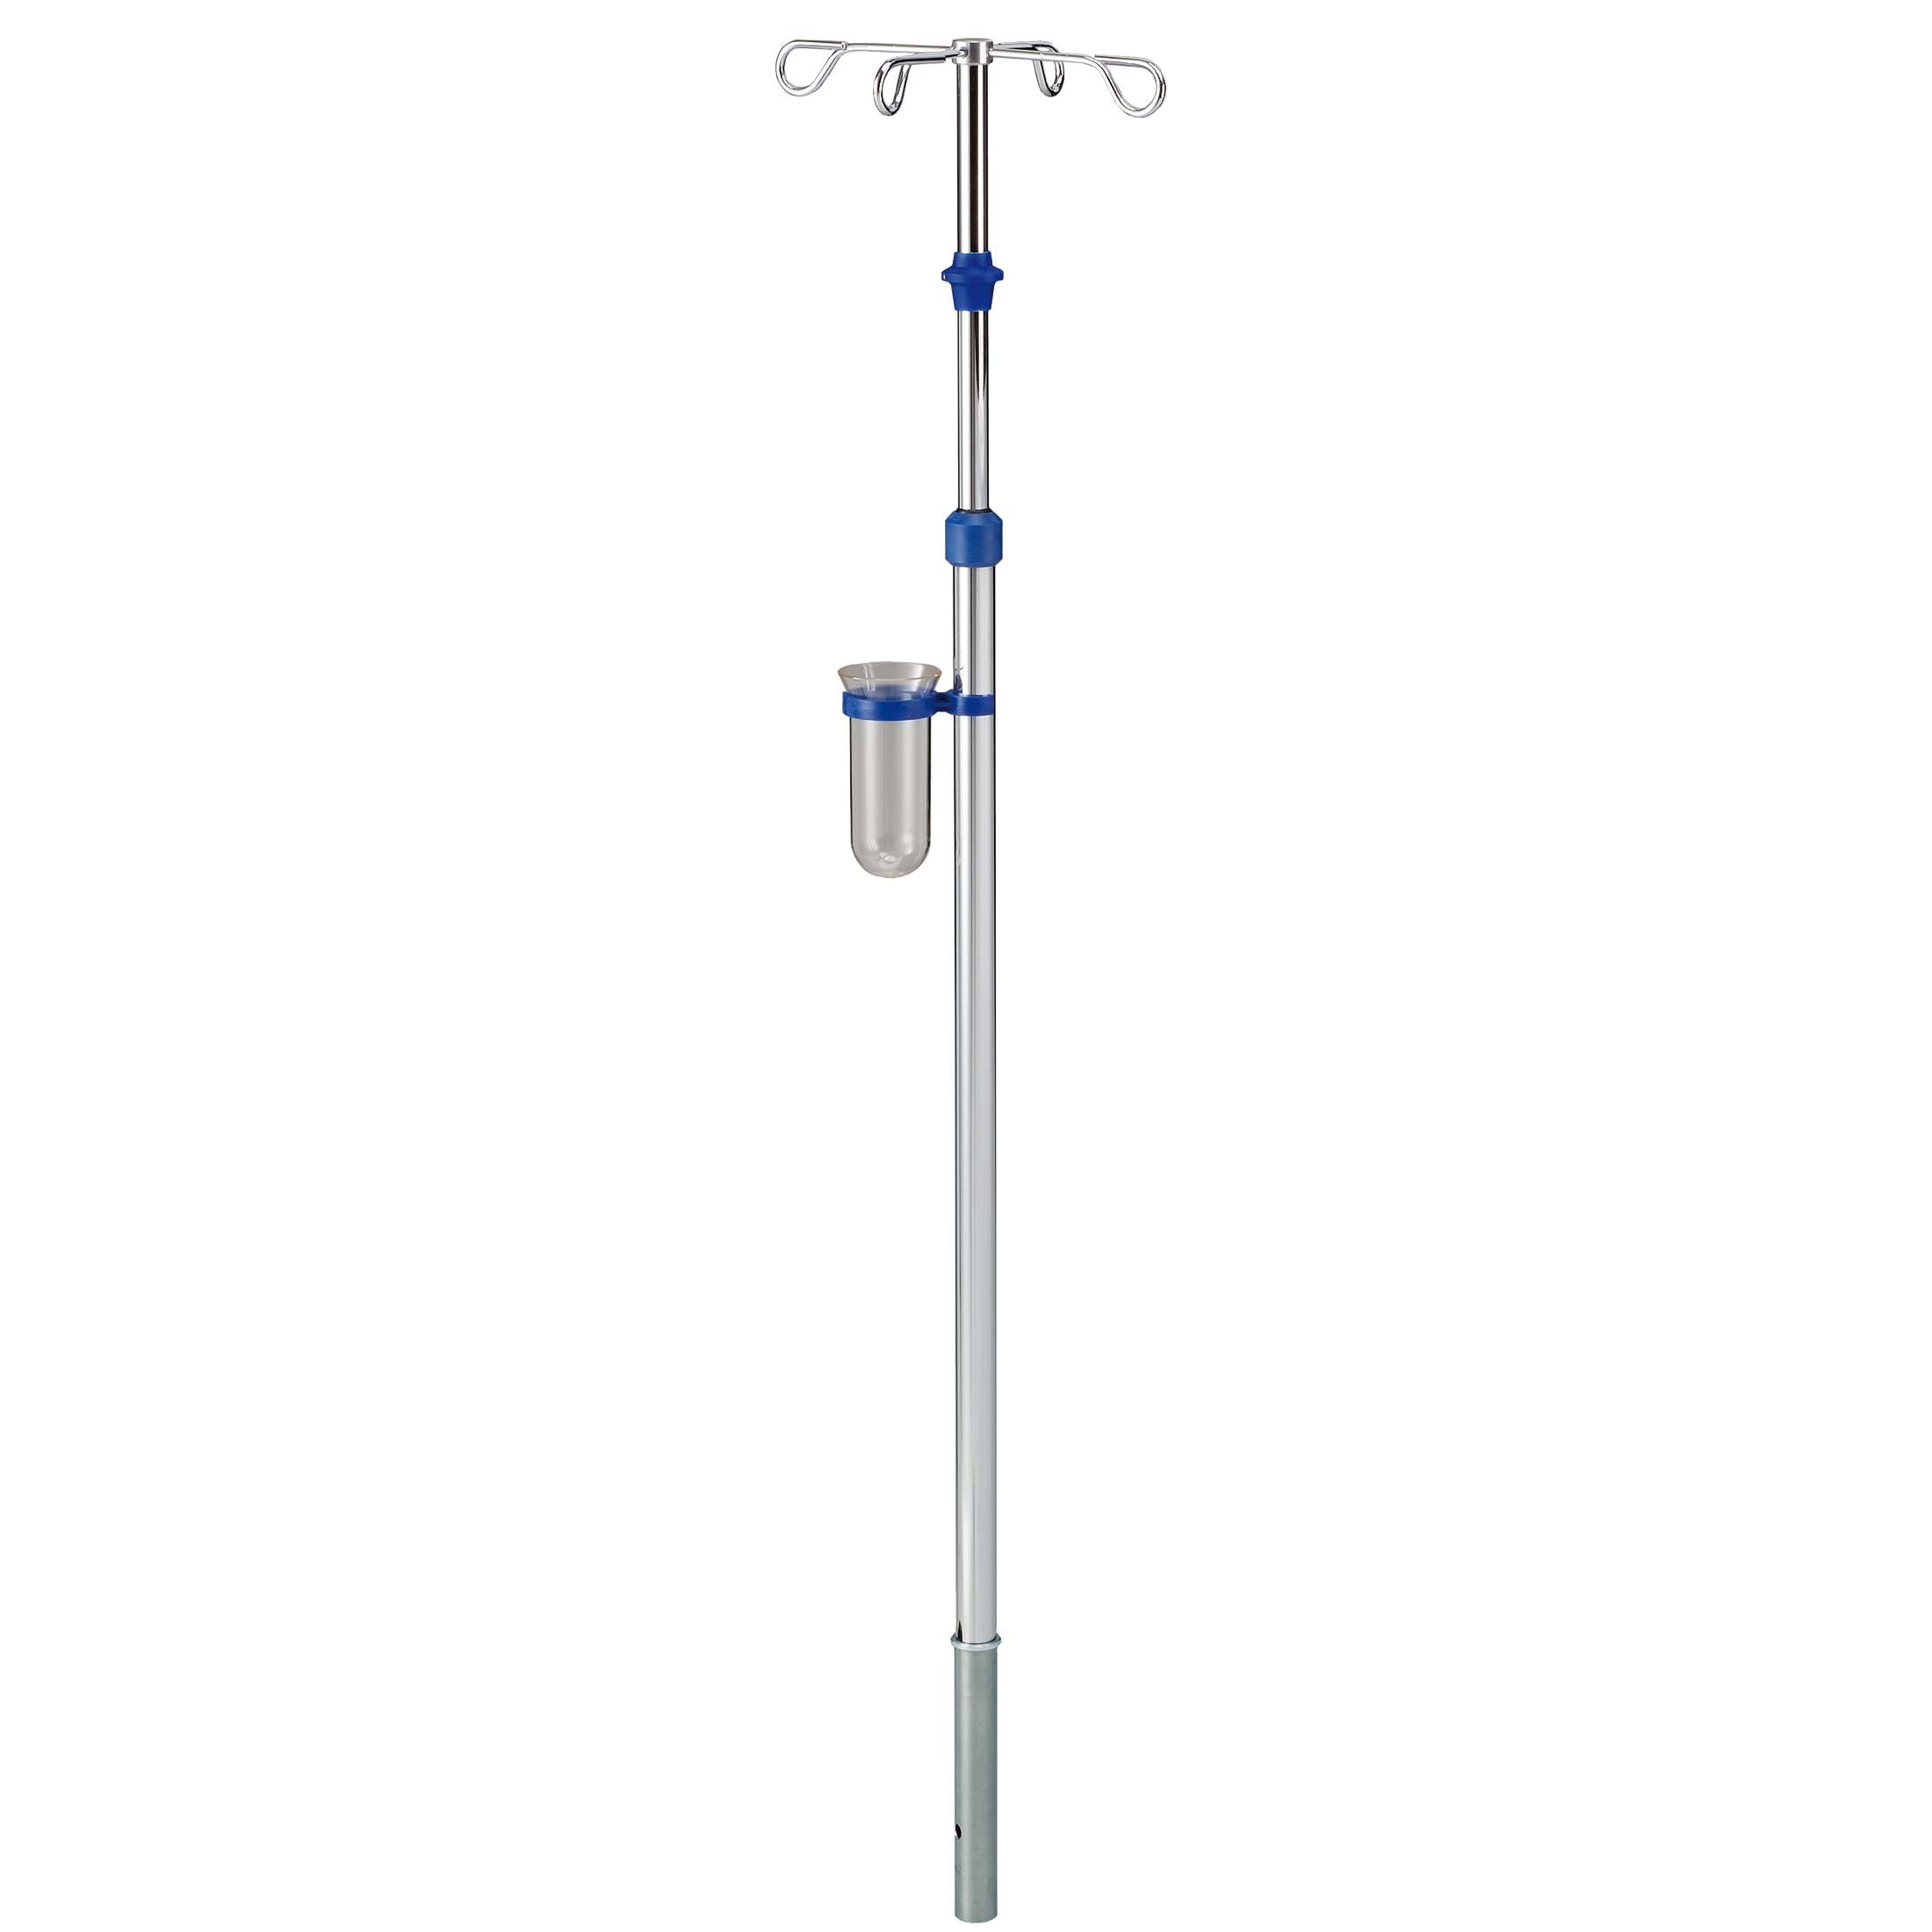 IV-Pole / Drip stand for bed post